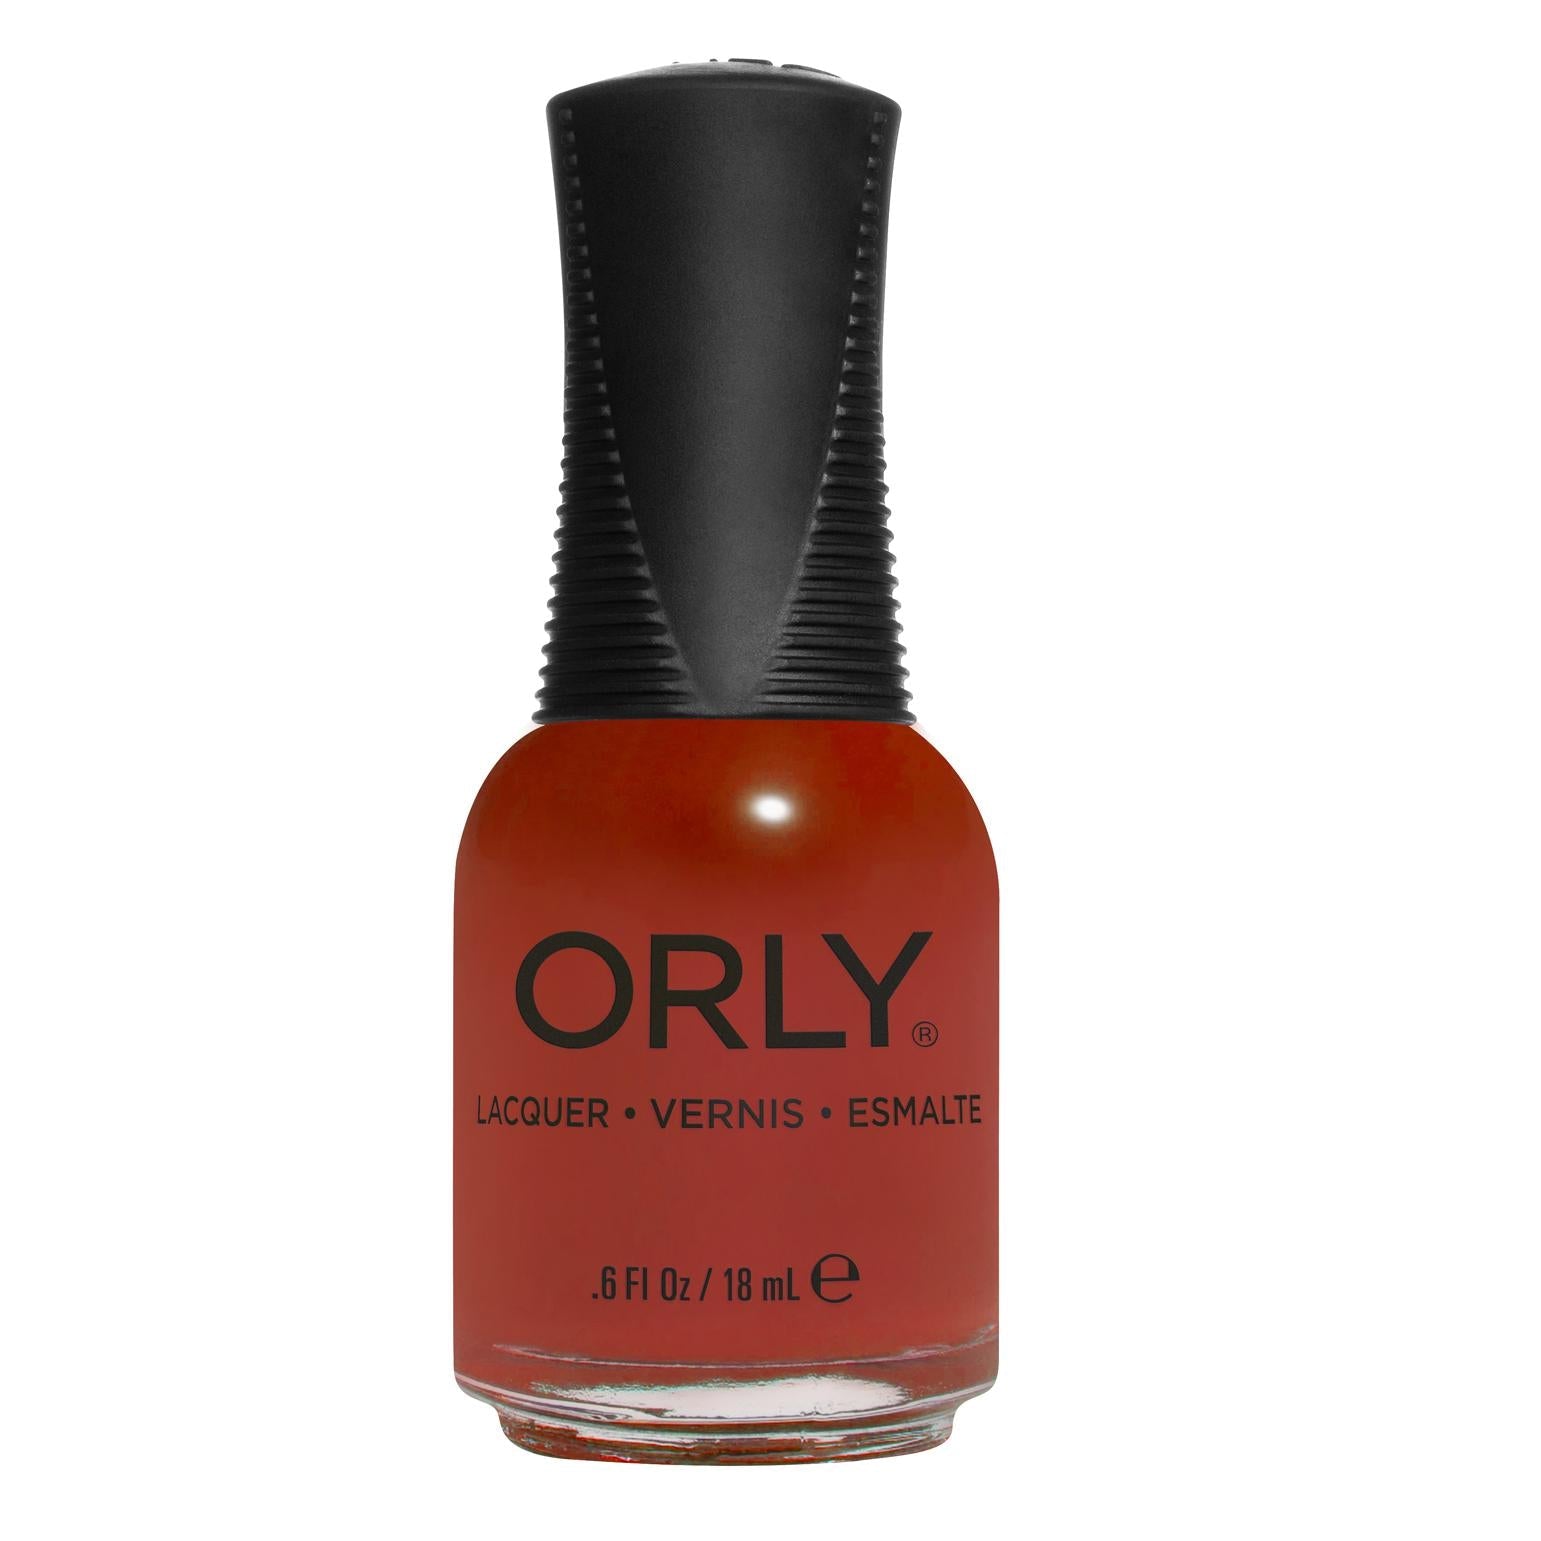 Orly Nail Lacquer - Red Rock - #2000060